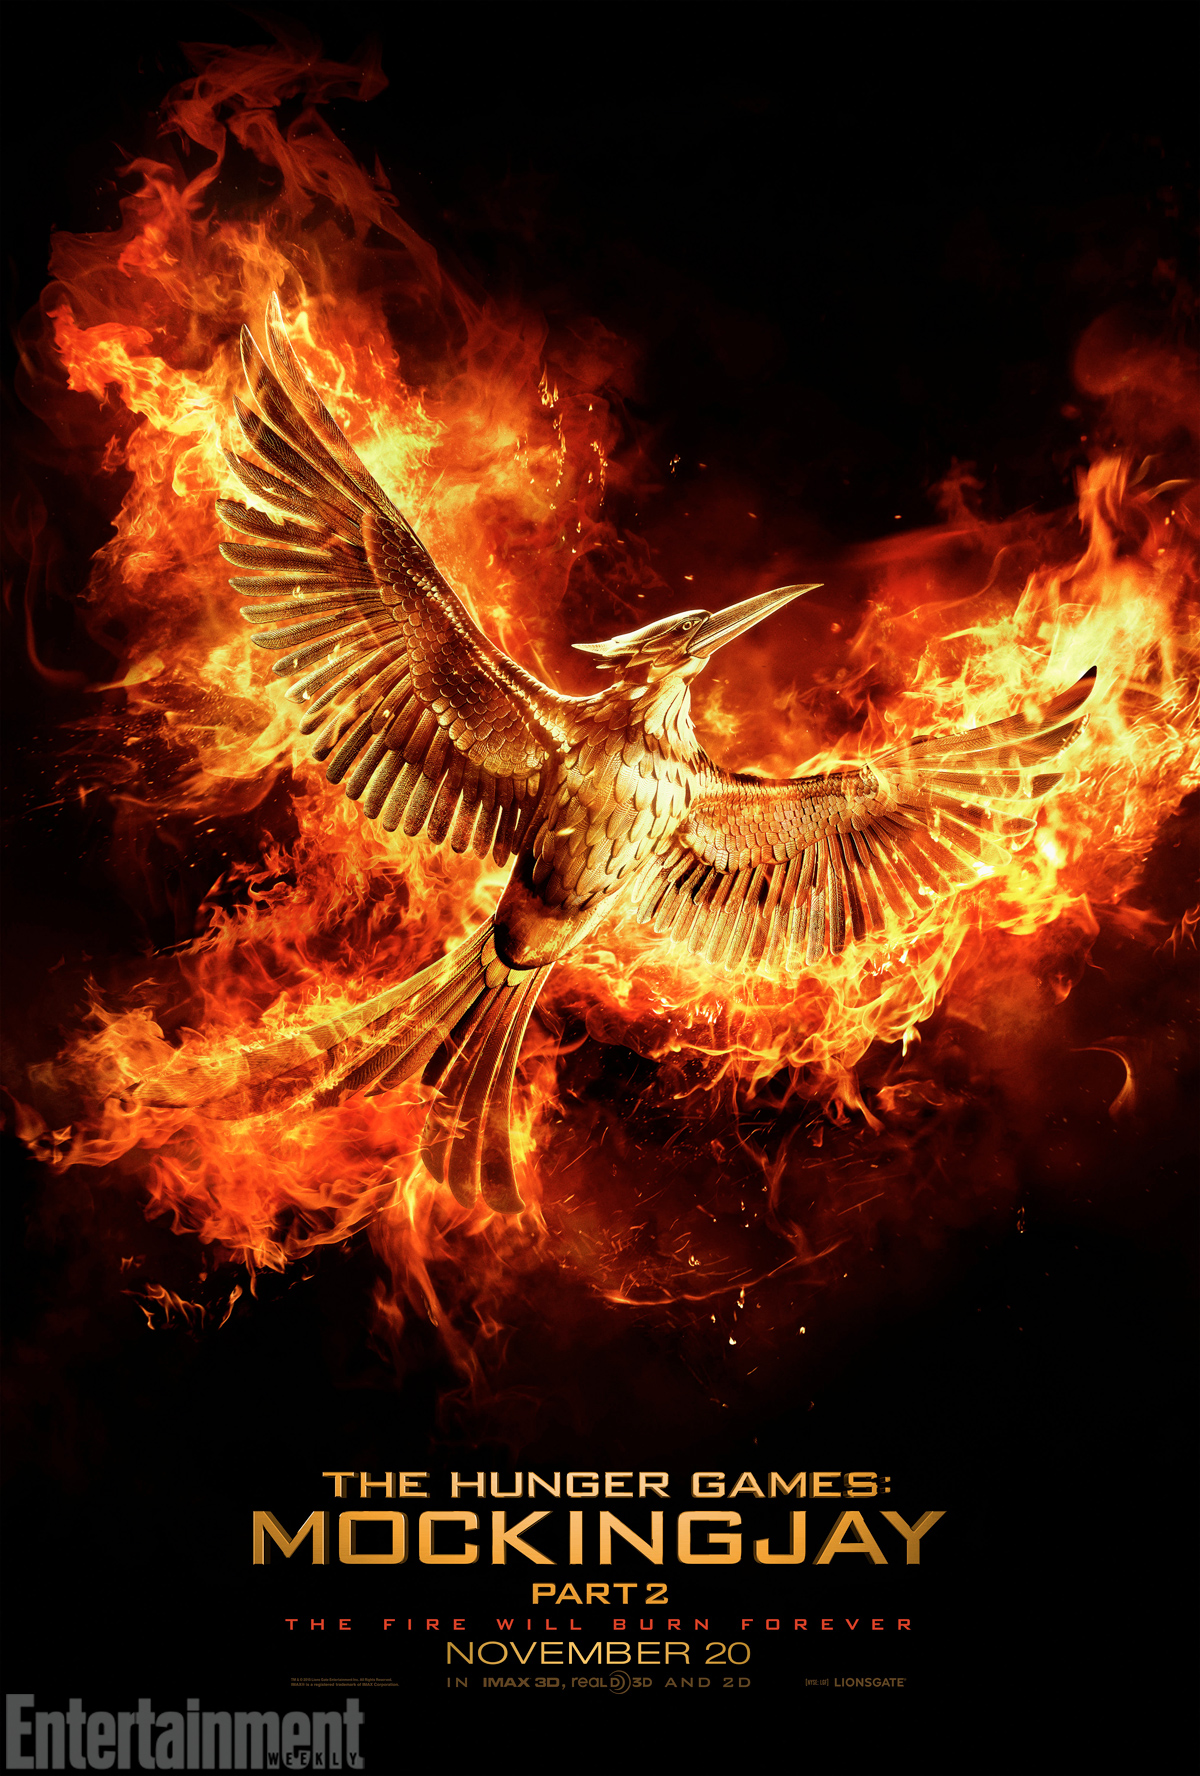 The Hunger Games and Catching Fire Double Feature: A Review in